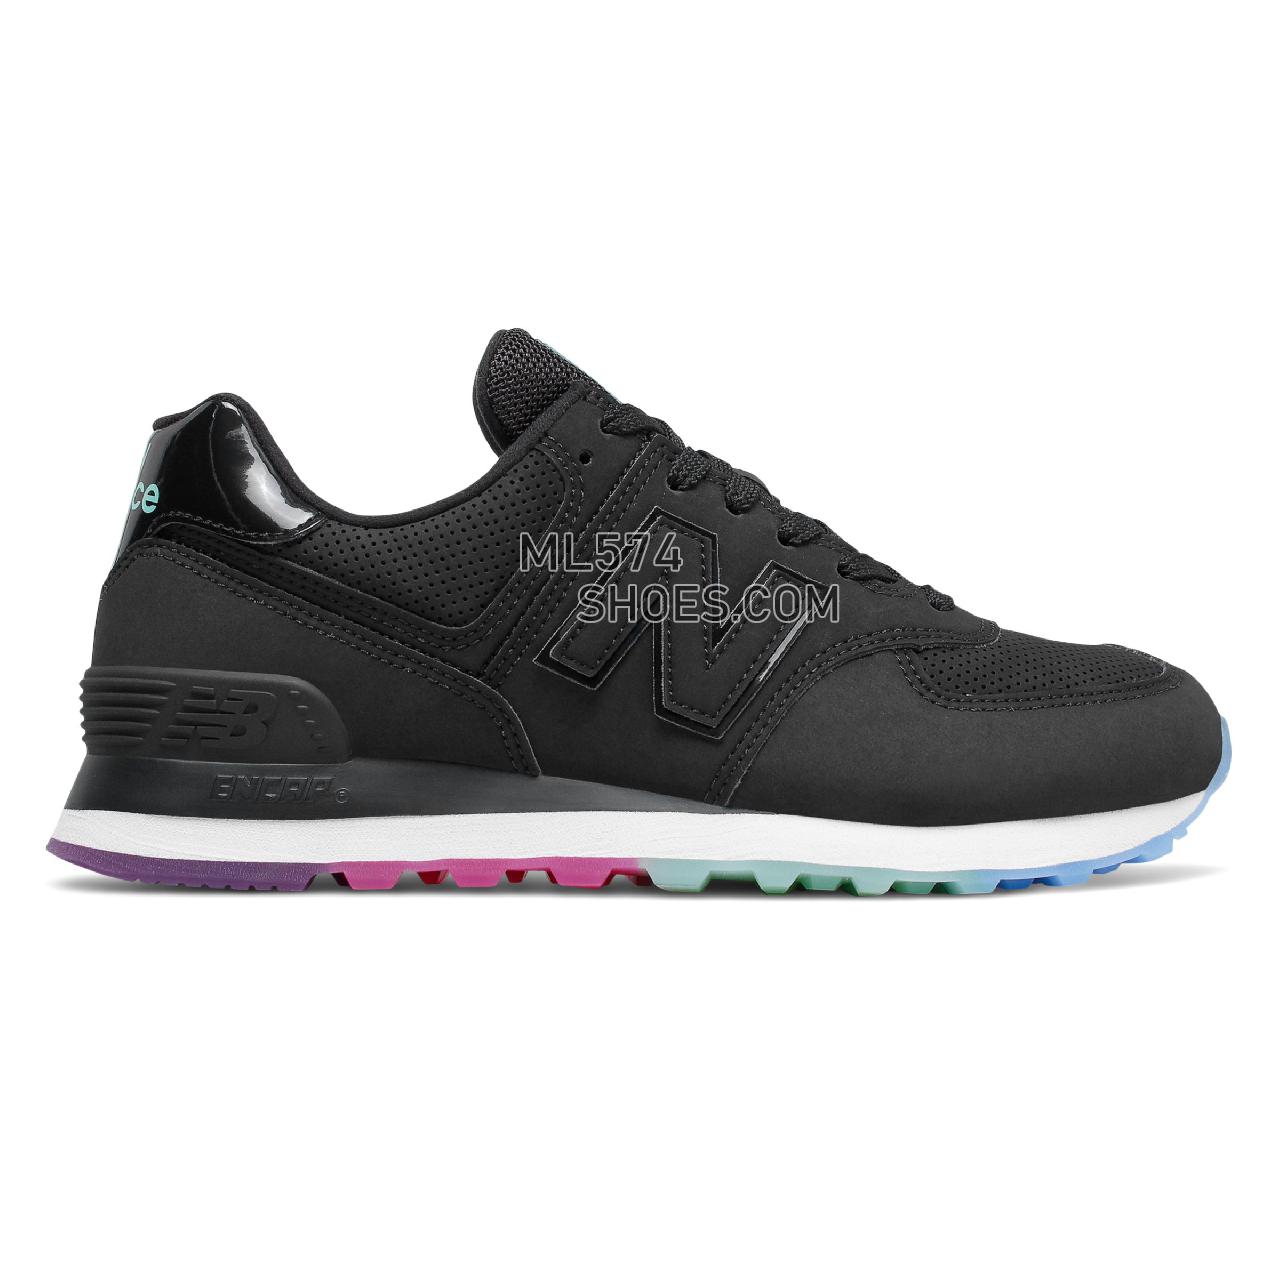 New Balance 574 - Women's Classic Sneakers - Black with Neo Mint - WL574SOO